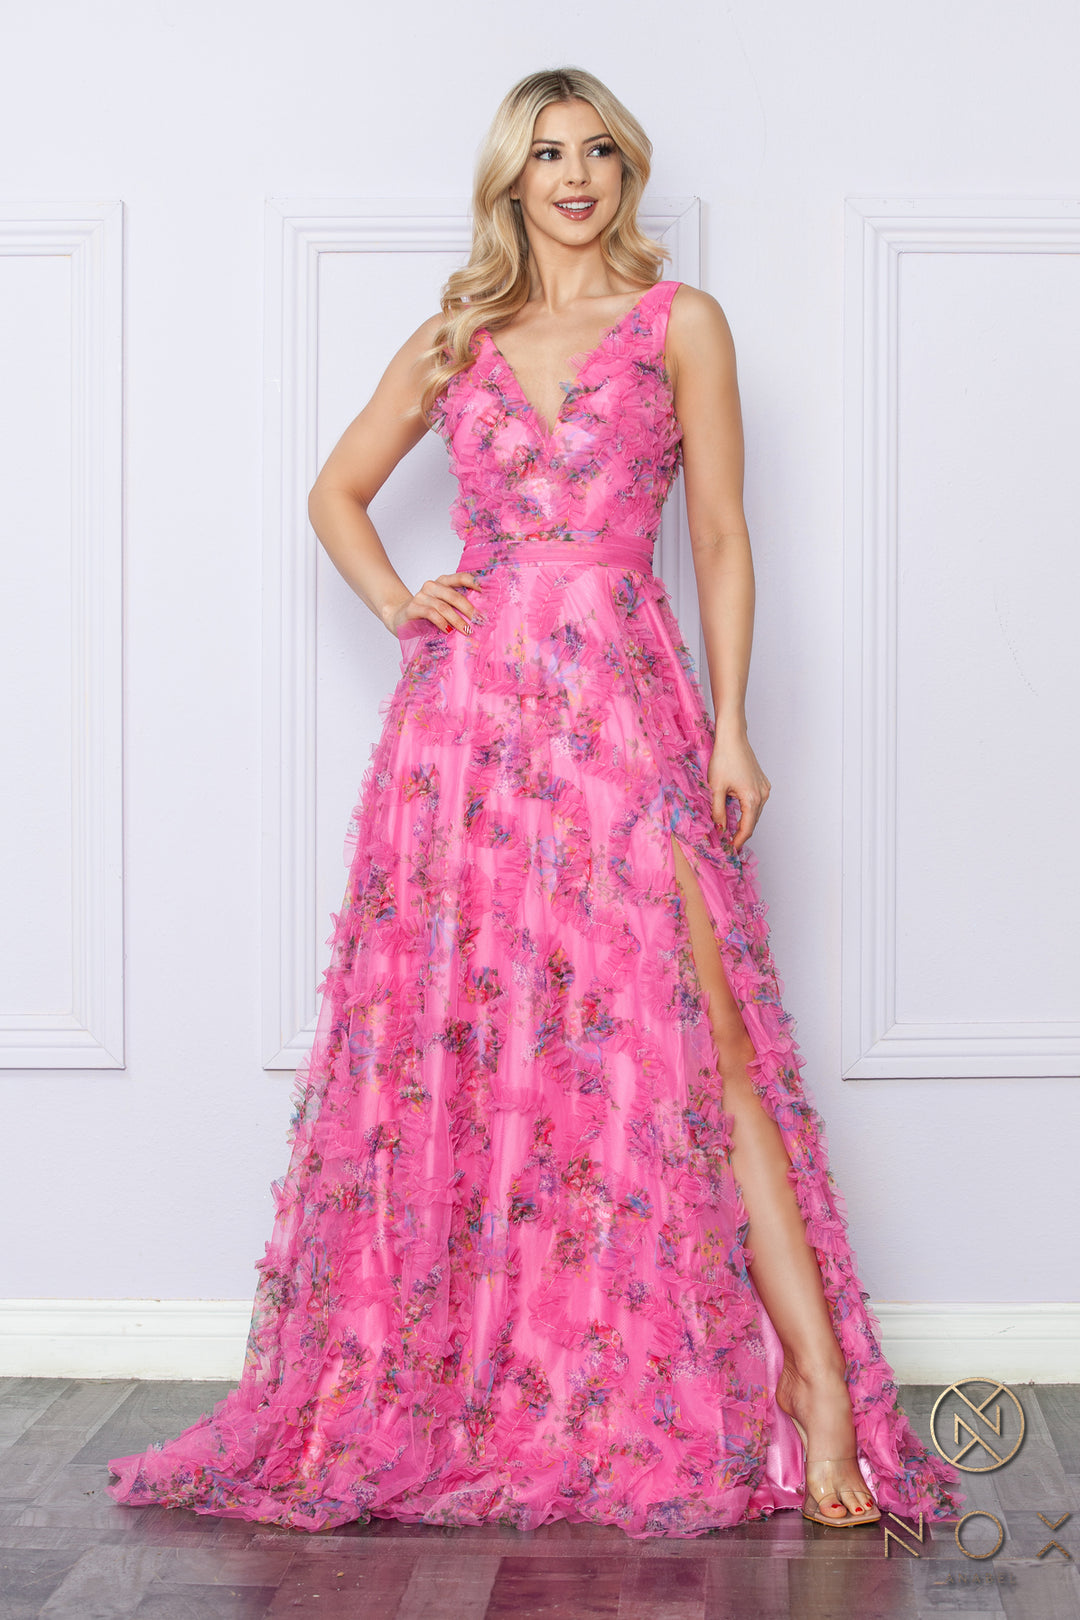 Floral Print A-line Ruffled Slit Gown by Nox Anabel E1445